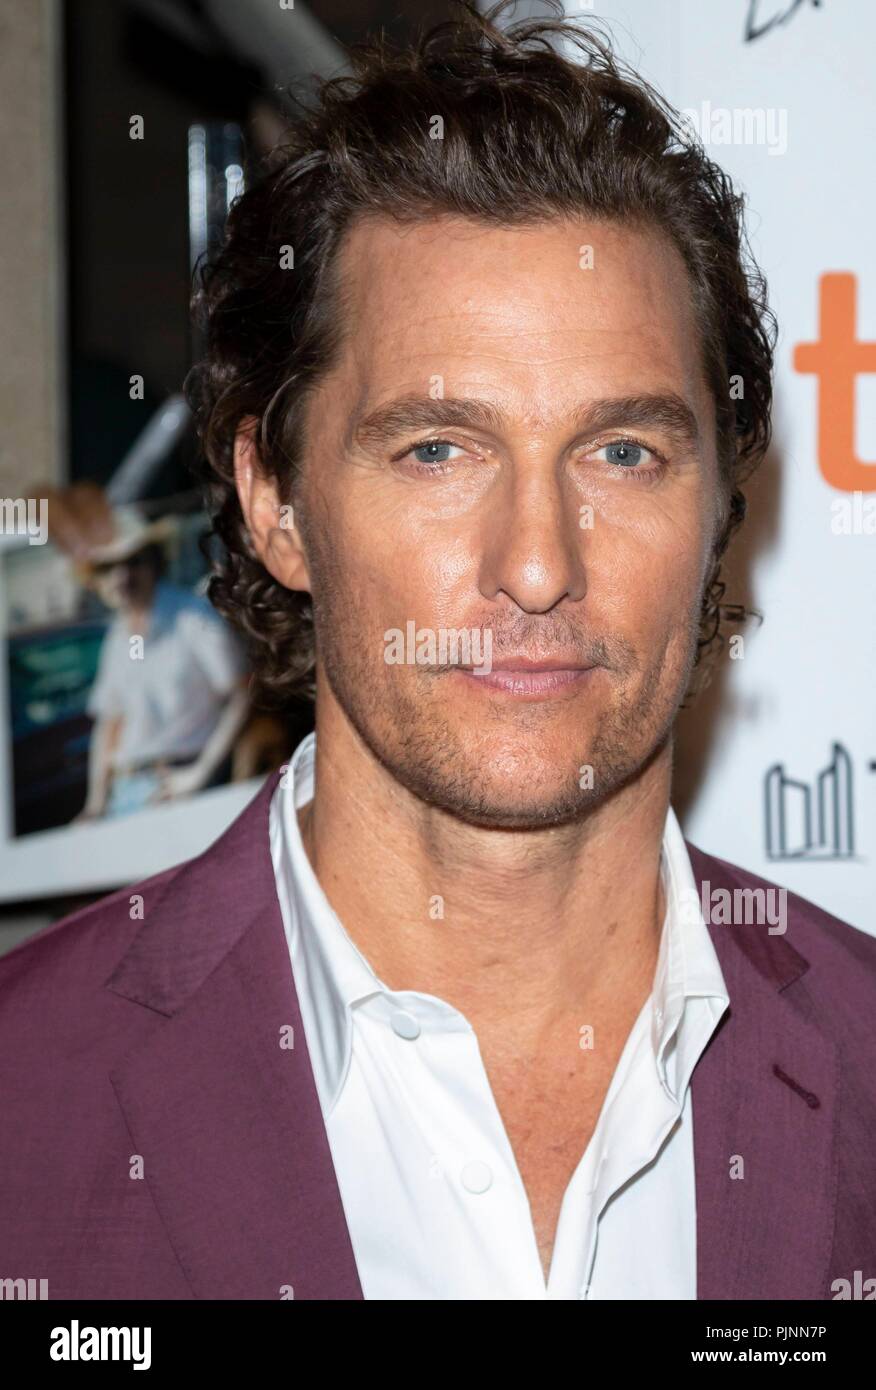 Toronto, Canada. 8th September 2018. Matthew McConaughey attends the premiere of 'White Boy Rick' during the 43rd Toronto International Film Festival, tiff, at Ryerson Theatre in Toronto, Canada, on 07 September 2018. | usage worldwide Credit: dpa picture alliance/Alamy Live News Stock Photo